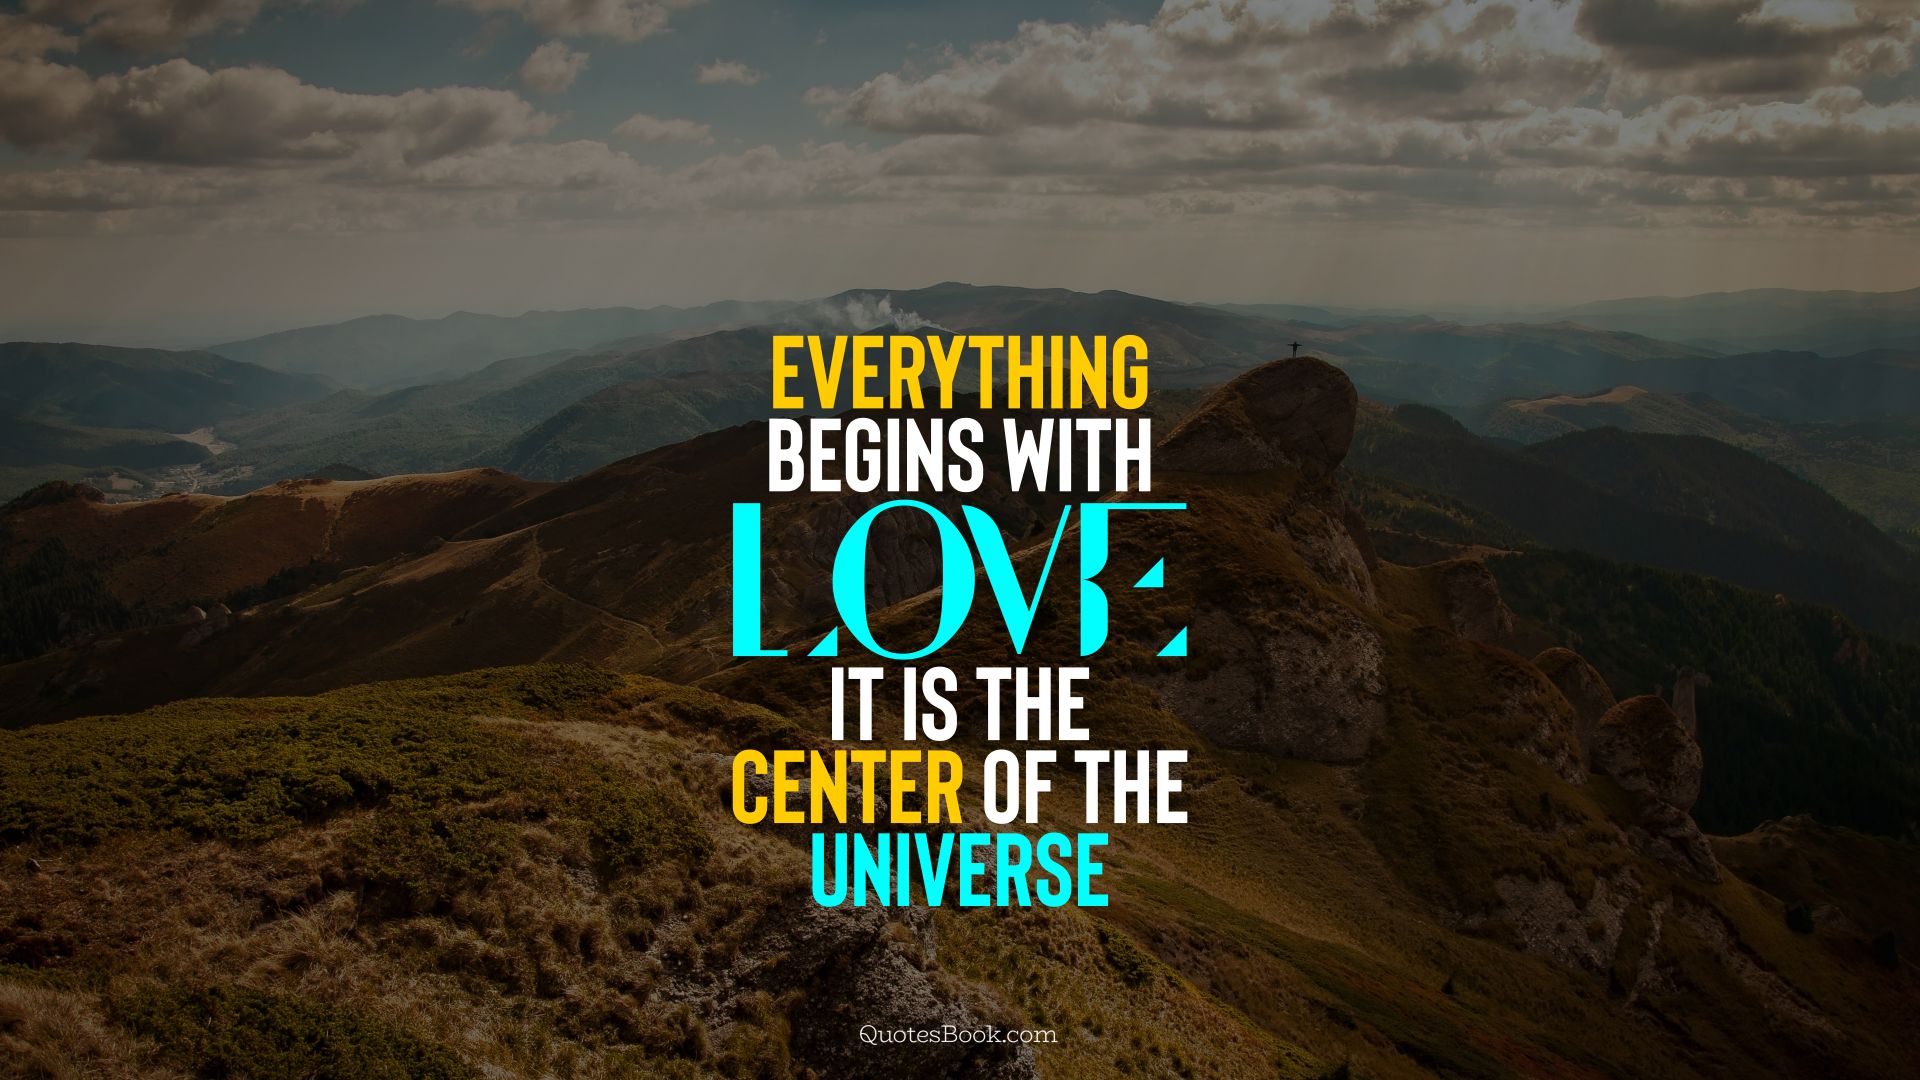 Everything begins with love. It is the center of the Universe. - Quote by QuotesBook